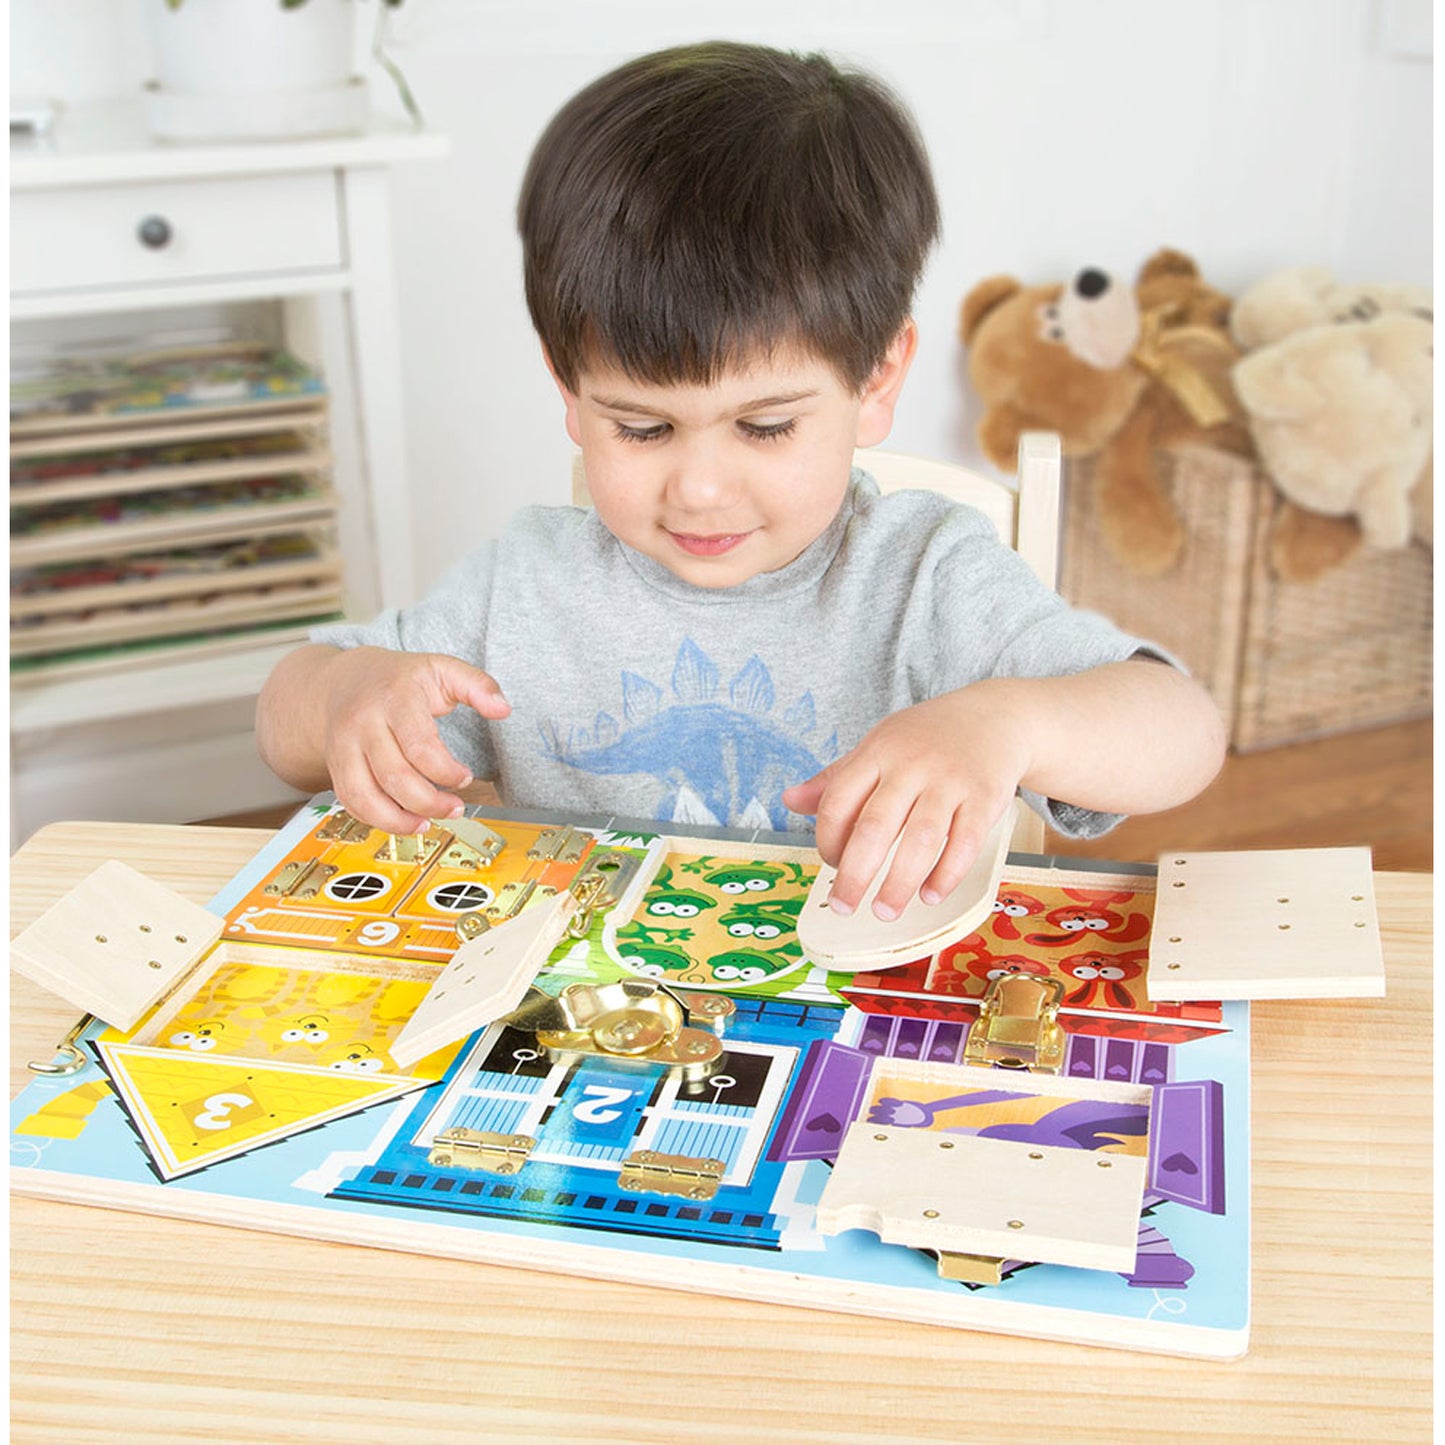 Melissa & Doug Latches Wooden Learning Board - Educational Activity Toy